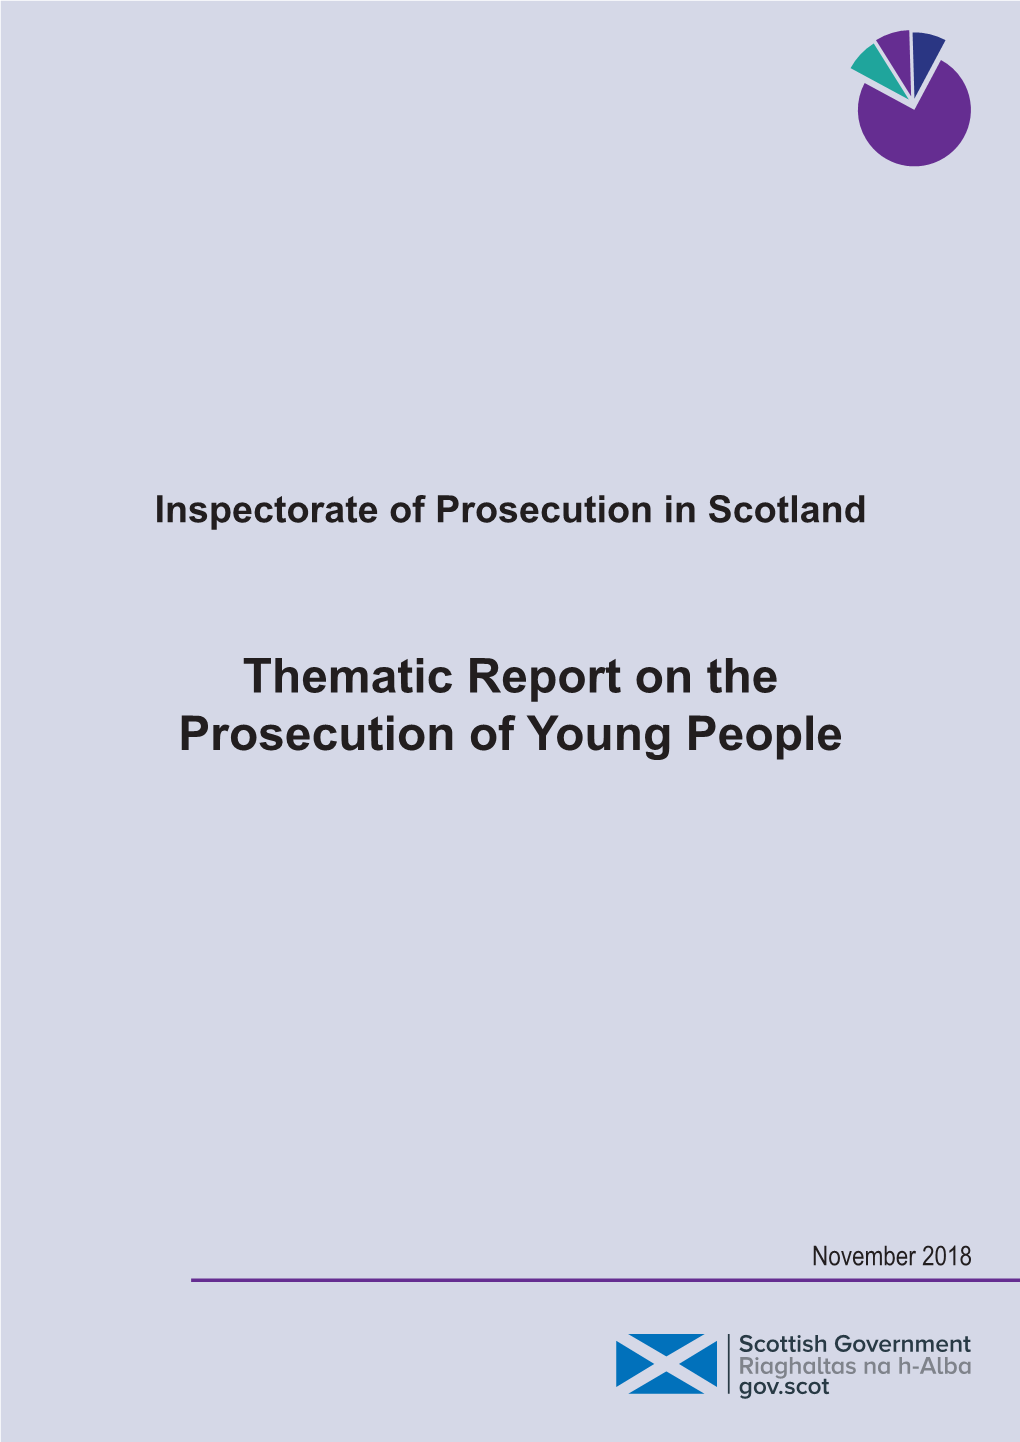 Thematic Report on the Prosecution of Young People